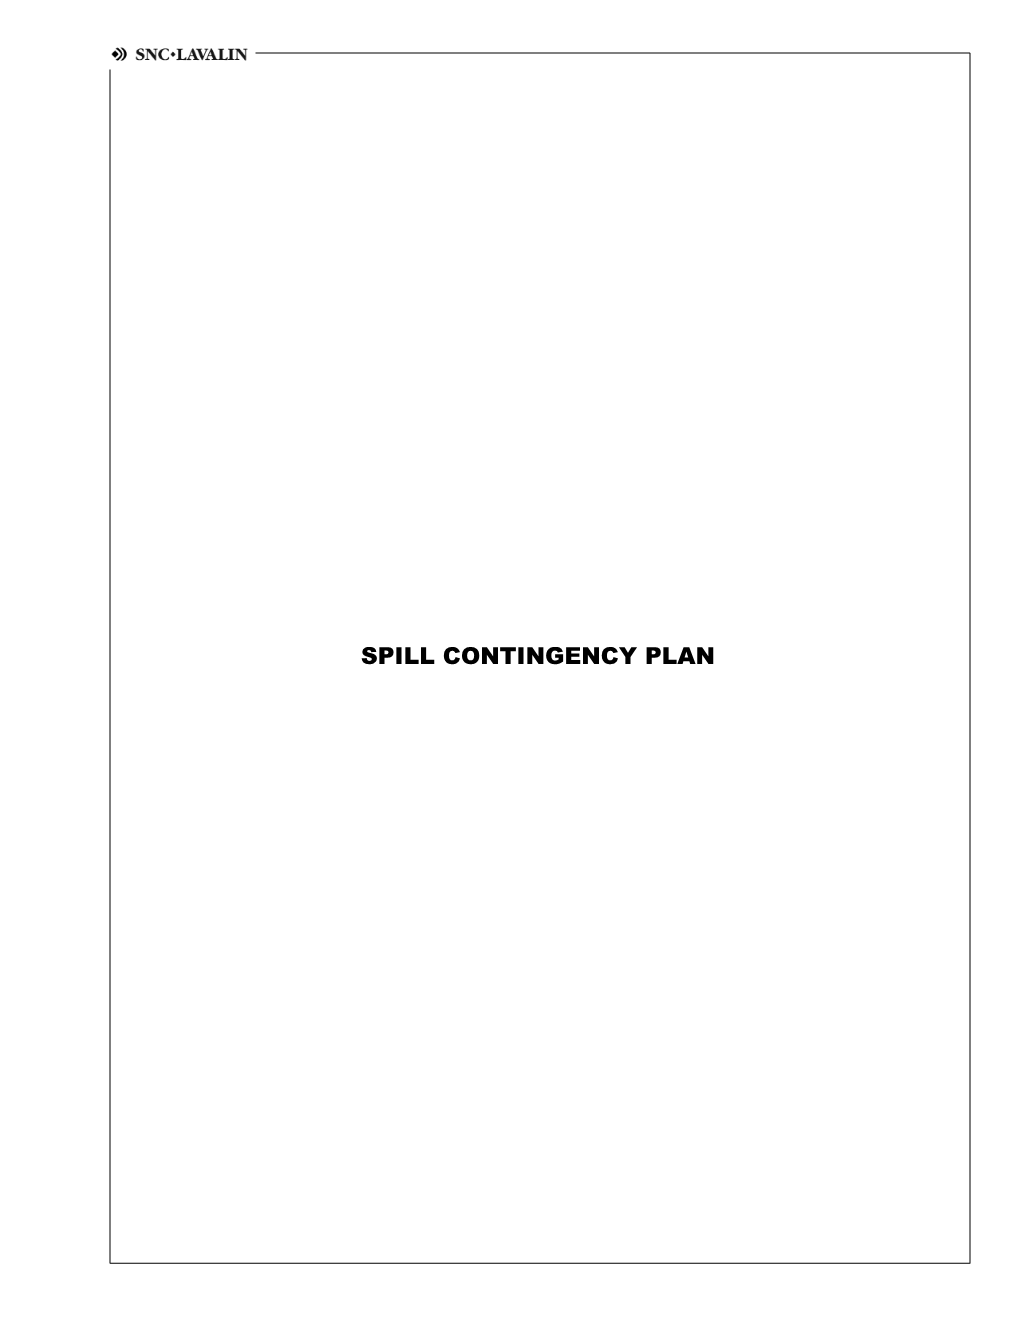 SPILL CONTINGENCY PLAN Land Use Permit Application Mackenzie Valley Land and Water Board